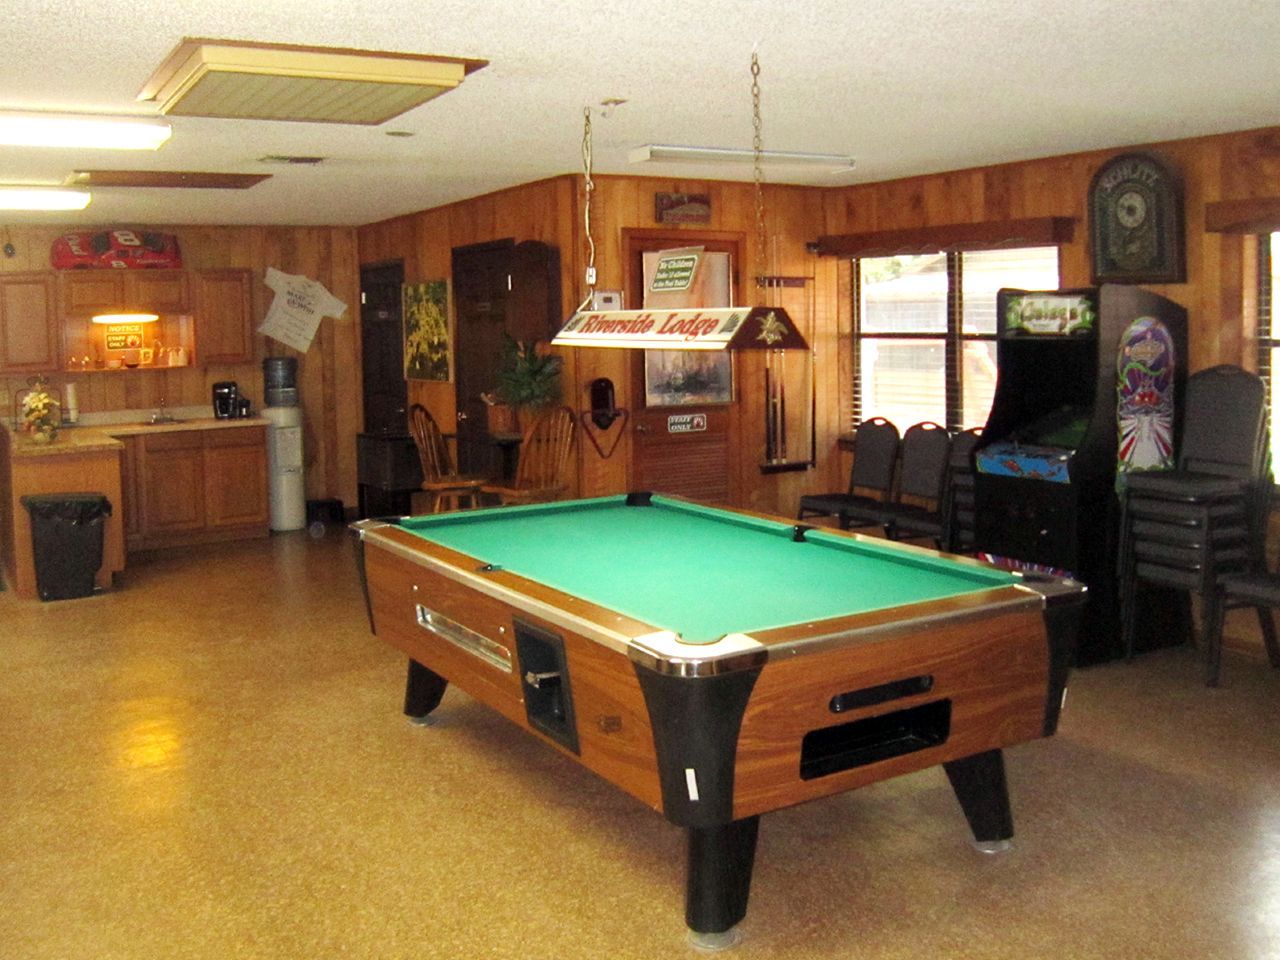 a pool table in a room with a budweiser sign above it